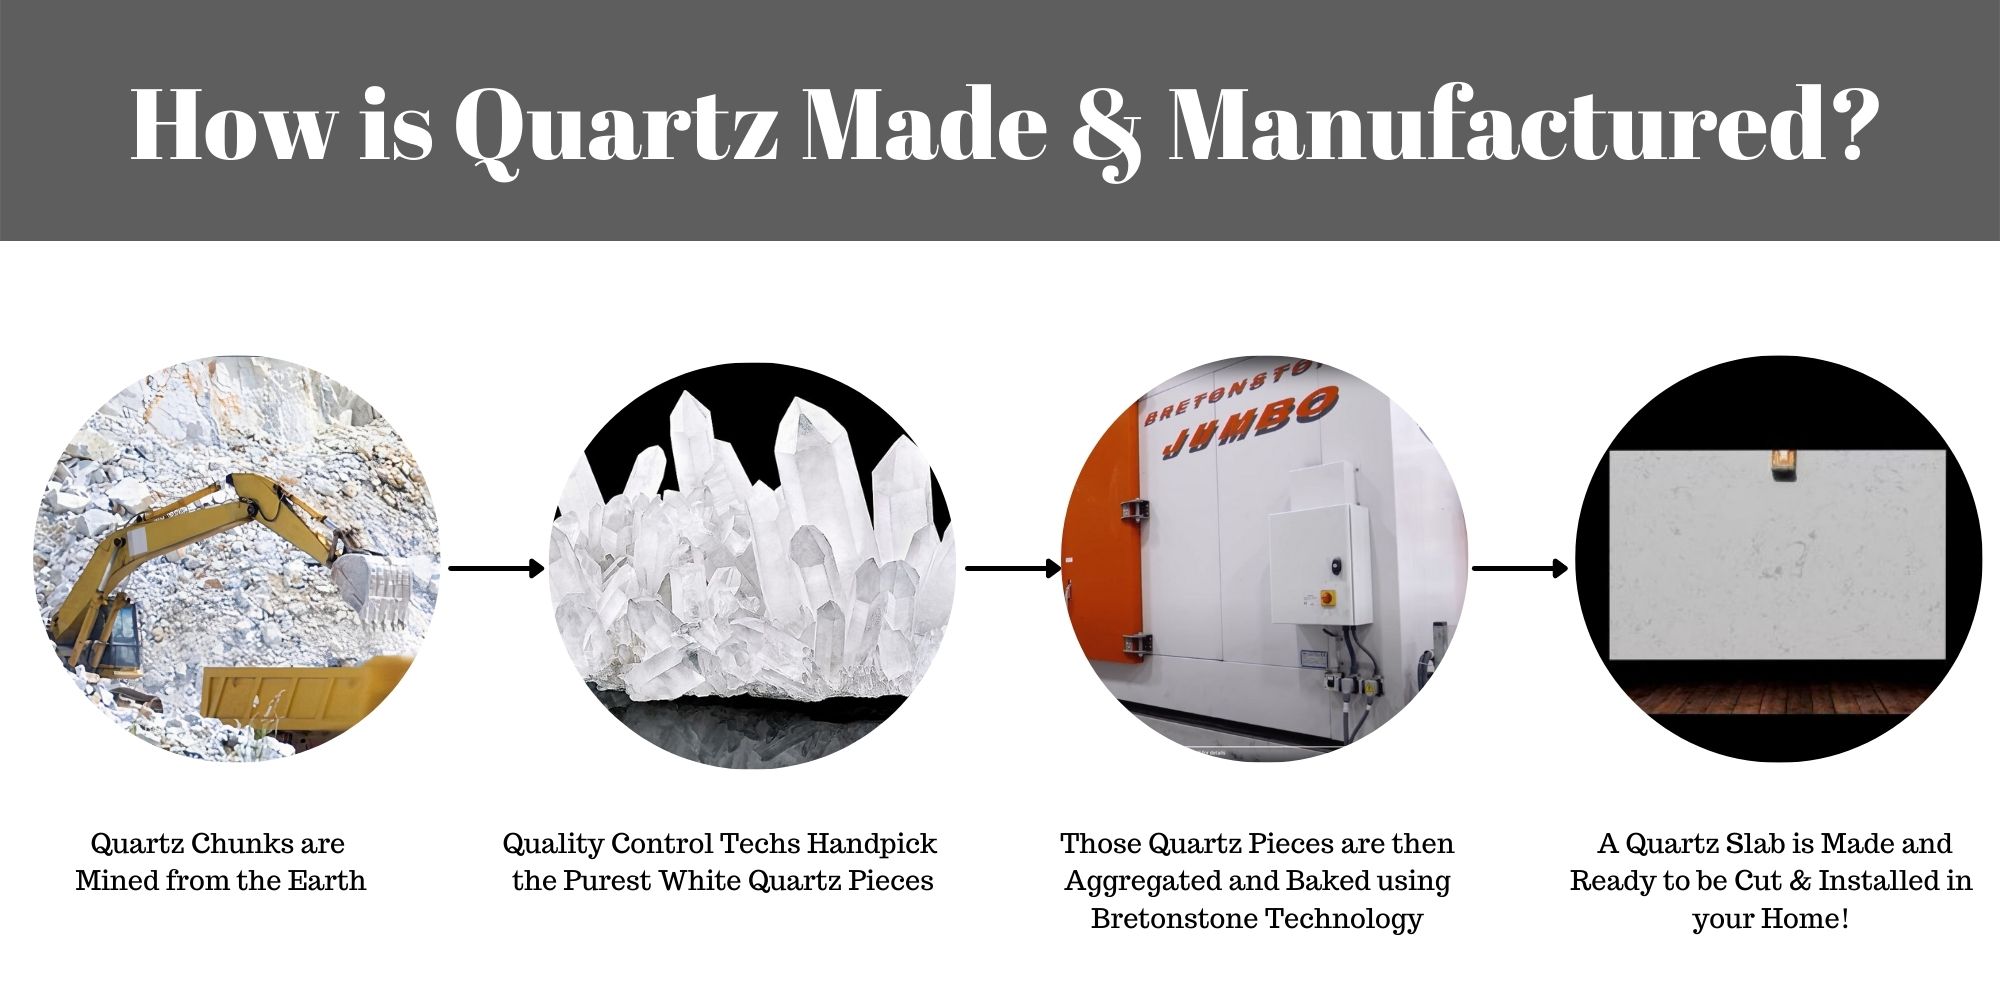 How is Quartz Made and Manufactured